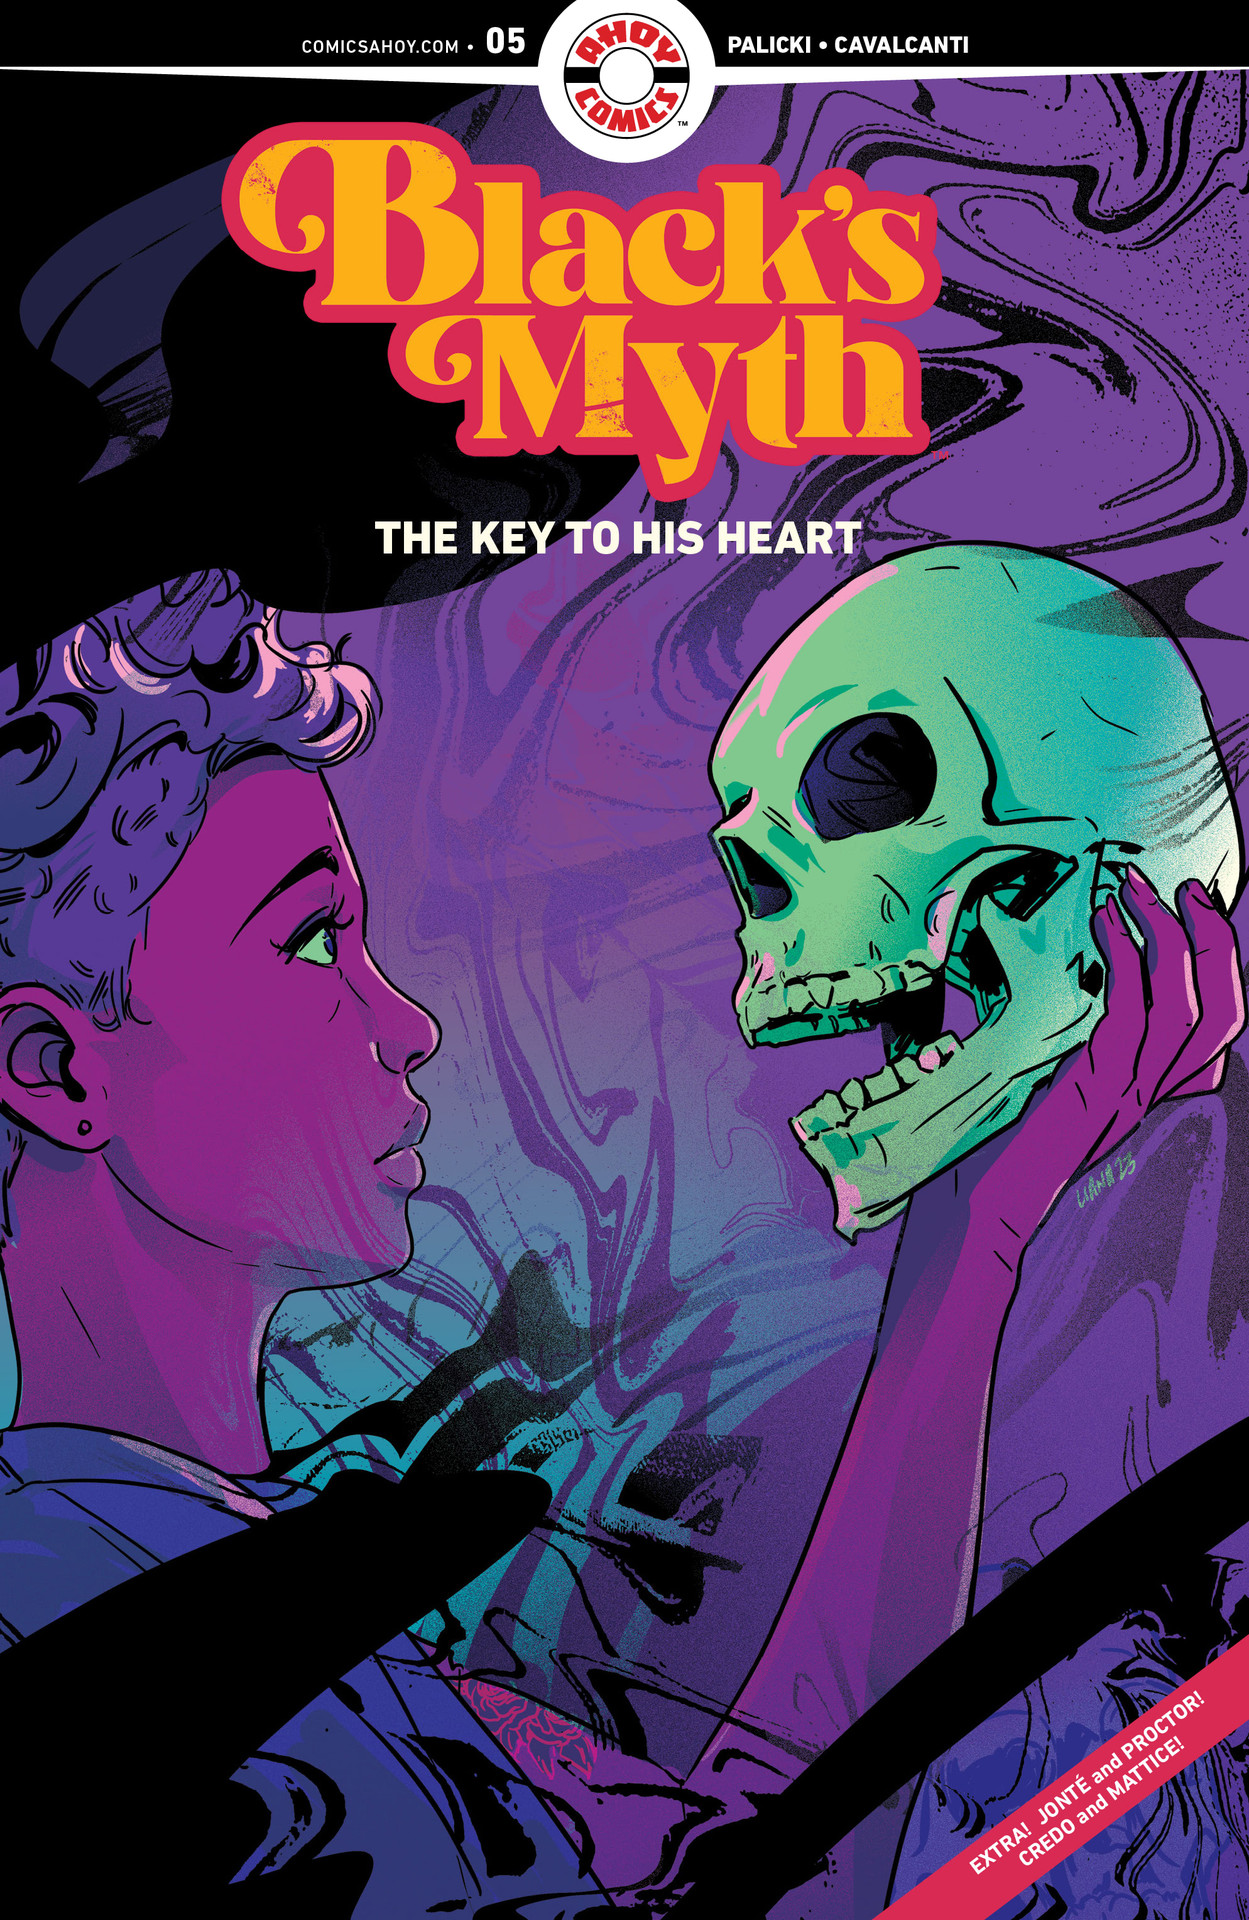 Read online Black’s Myth: The Key to His Heart comic -  Issue #5 - 1